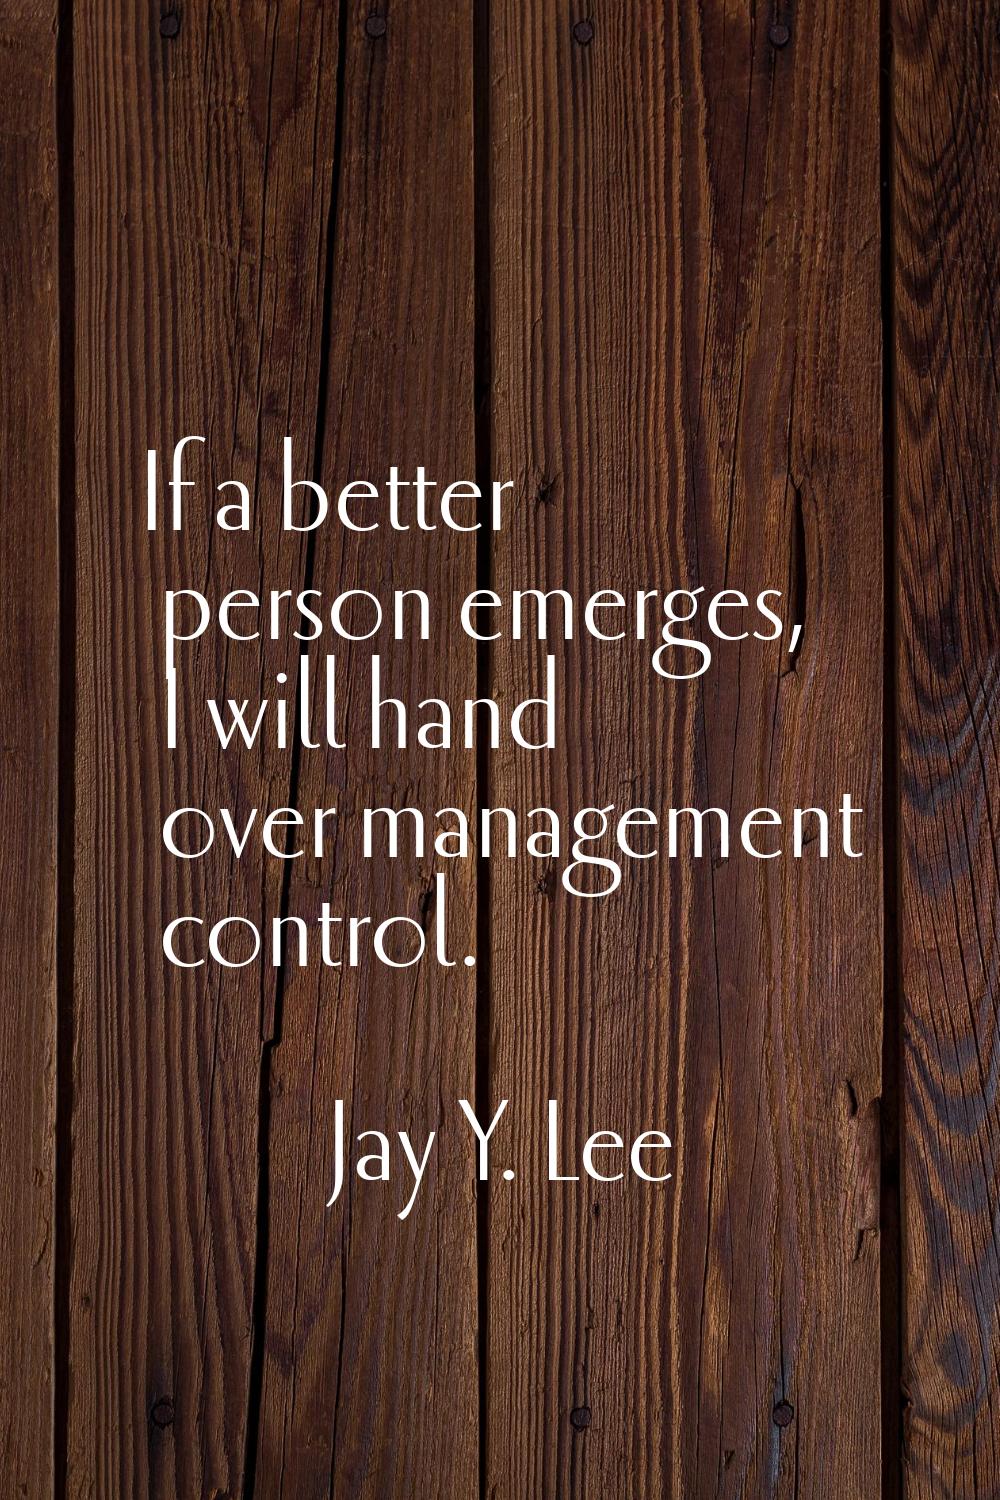 If a better person emerges, I will hand over management control.